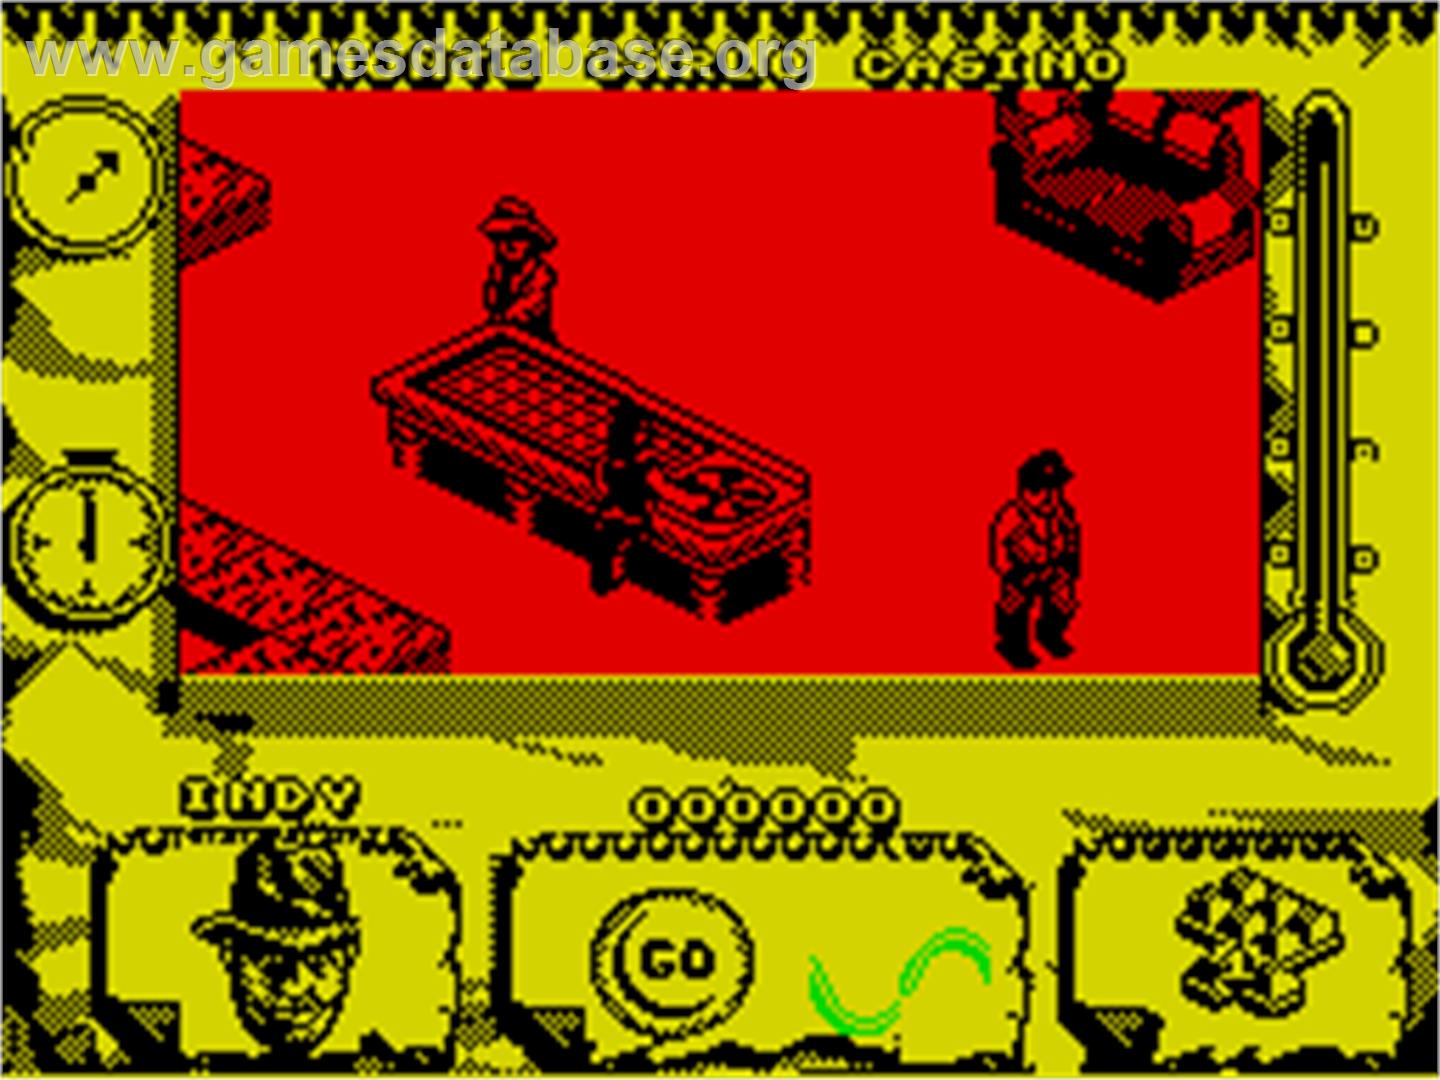 Indiana Jones and The Fate of Atlantis: The Action Game - Sinclair ZX Spectrum - Artwork - In Game